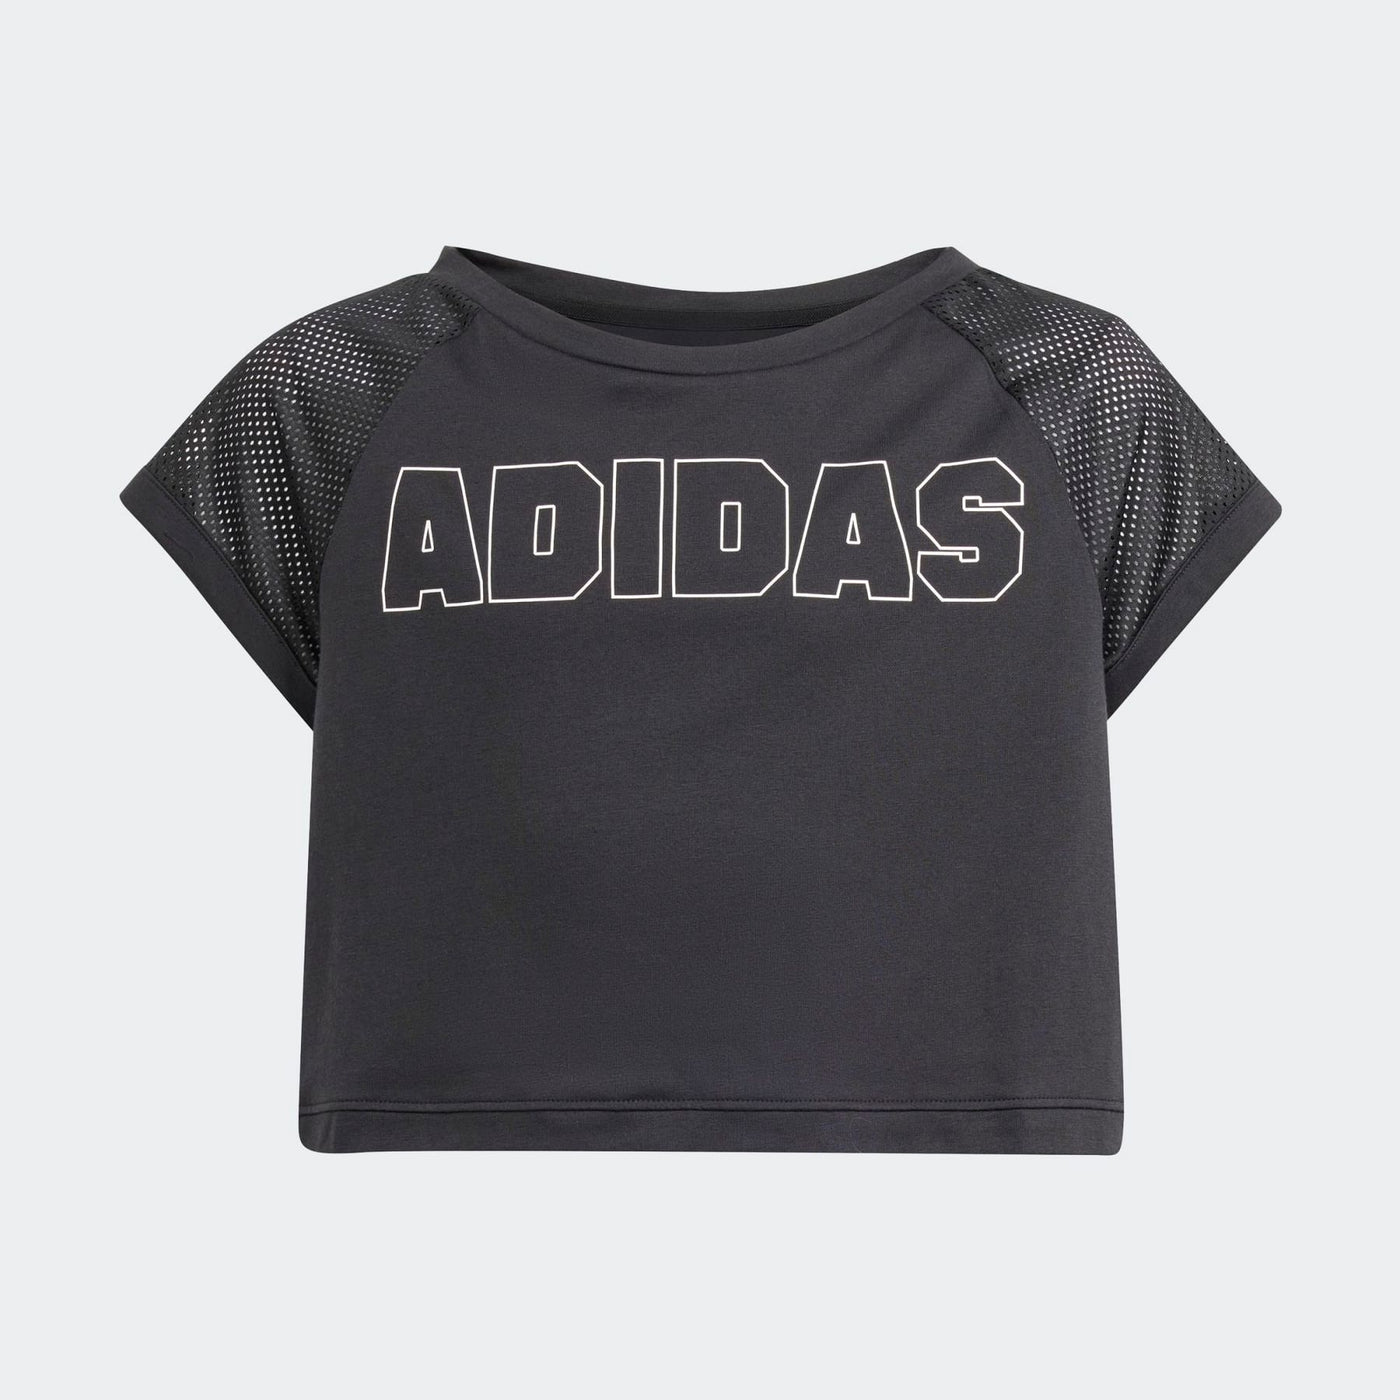 IS3776 - T-Shirt - Adidas